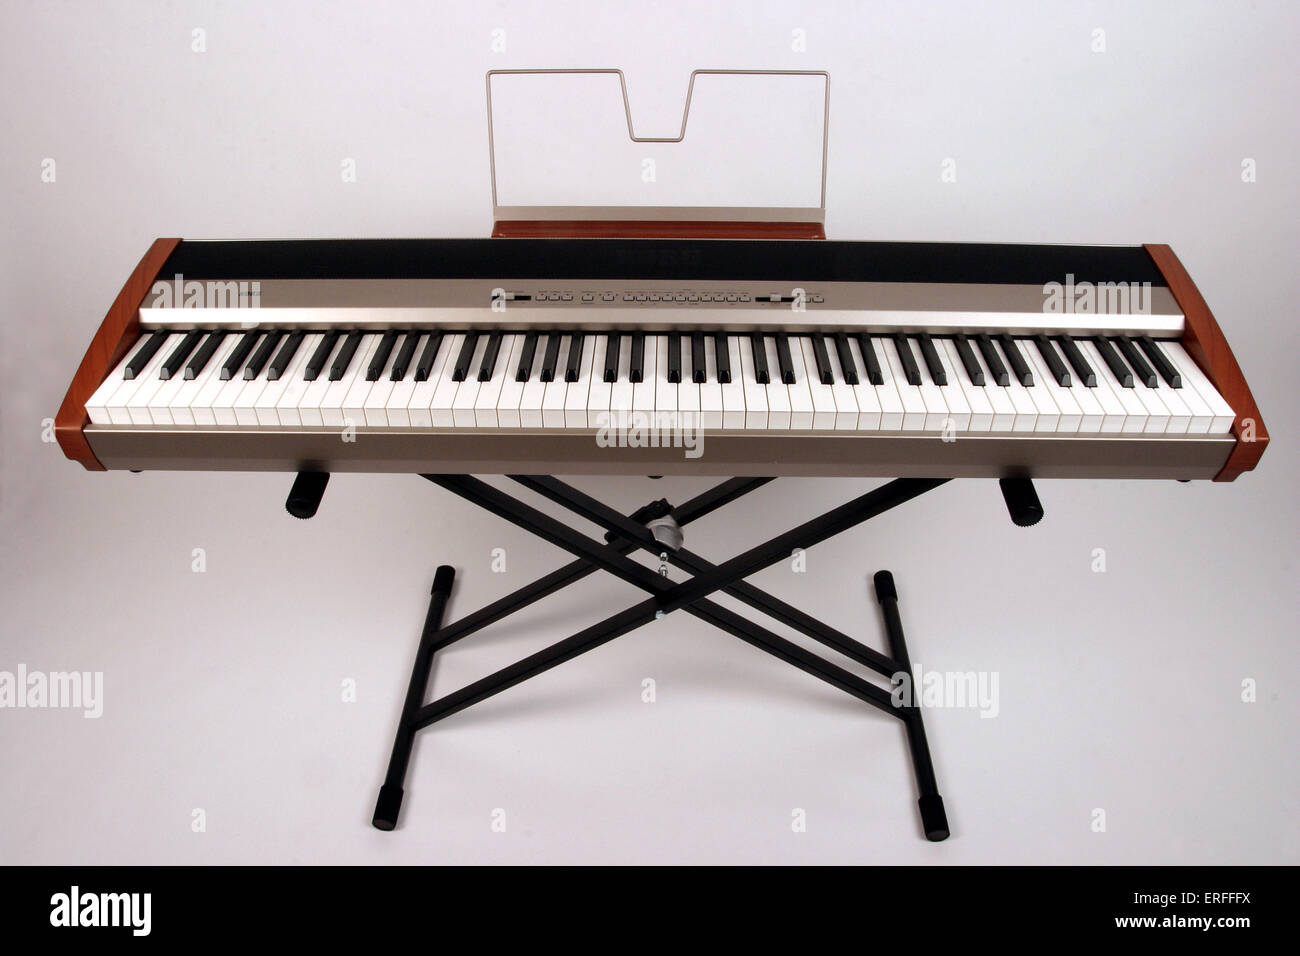 Digital piano - Korg SP300 with integral speakers Stock Photo - Alamy